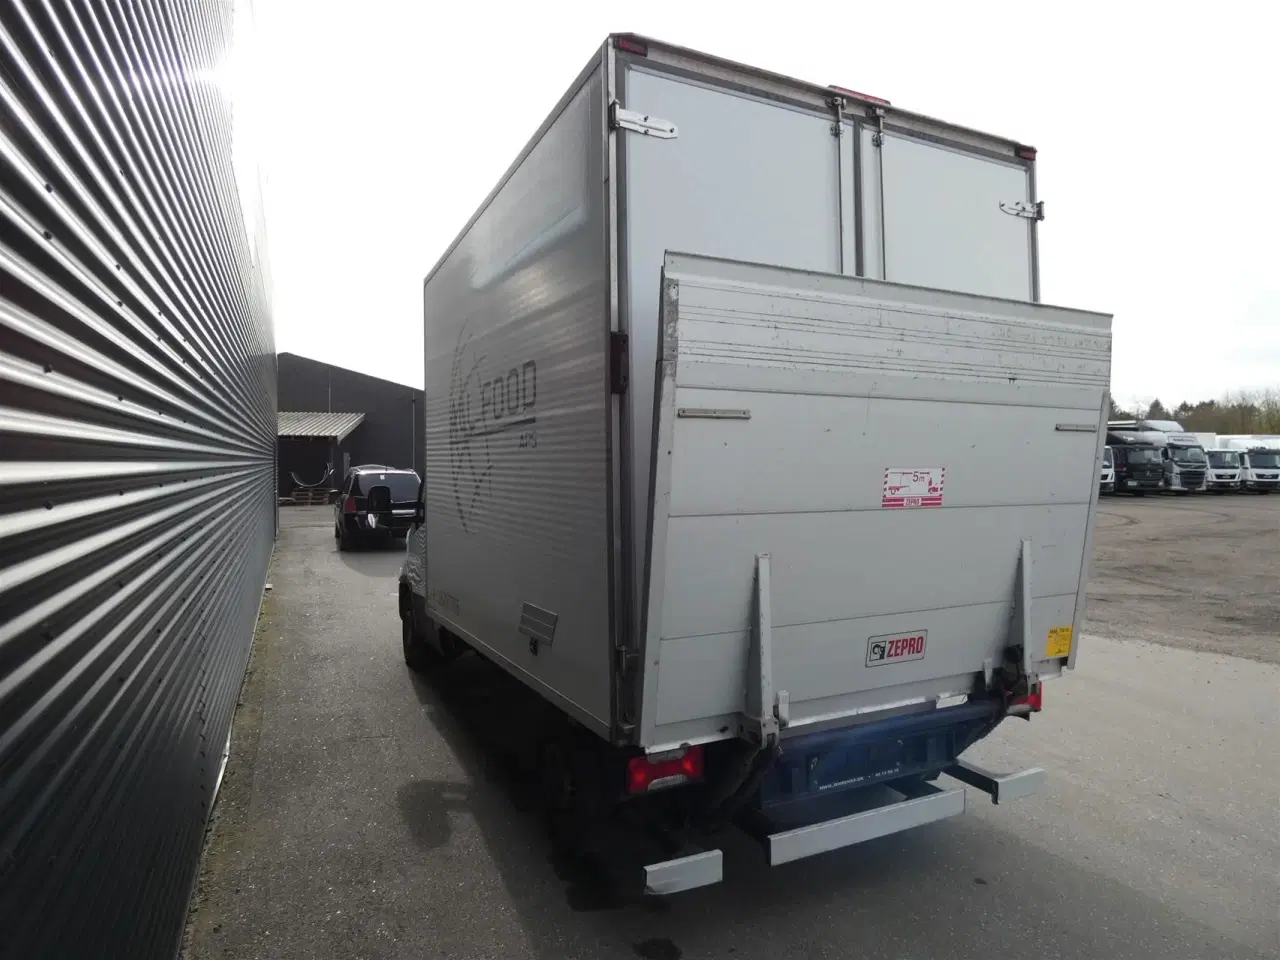 Billede 7 - Iveco Daily 35S17 3750mm 3,0 D 170HK Ladv./Chas. 6g